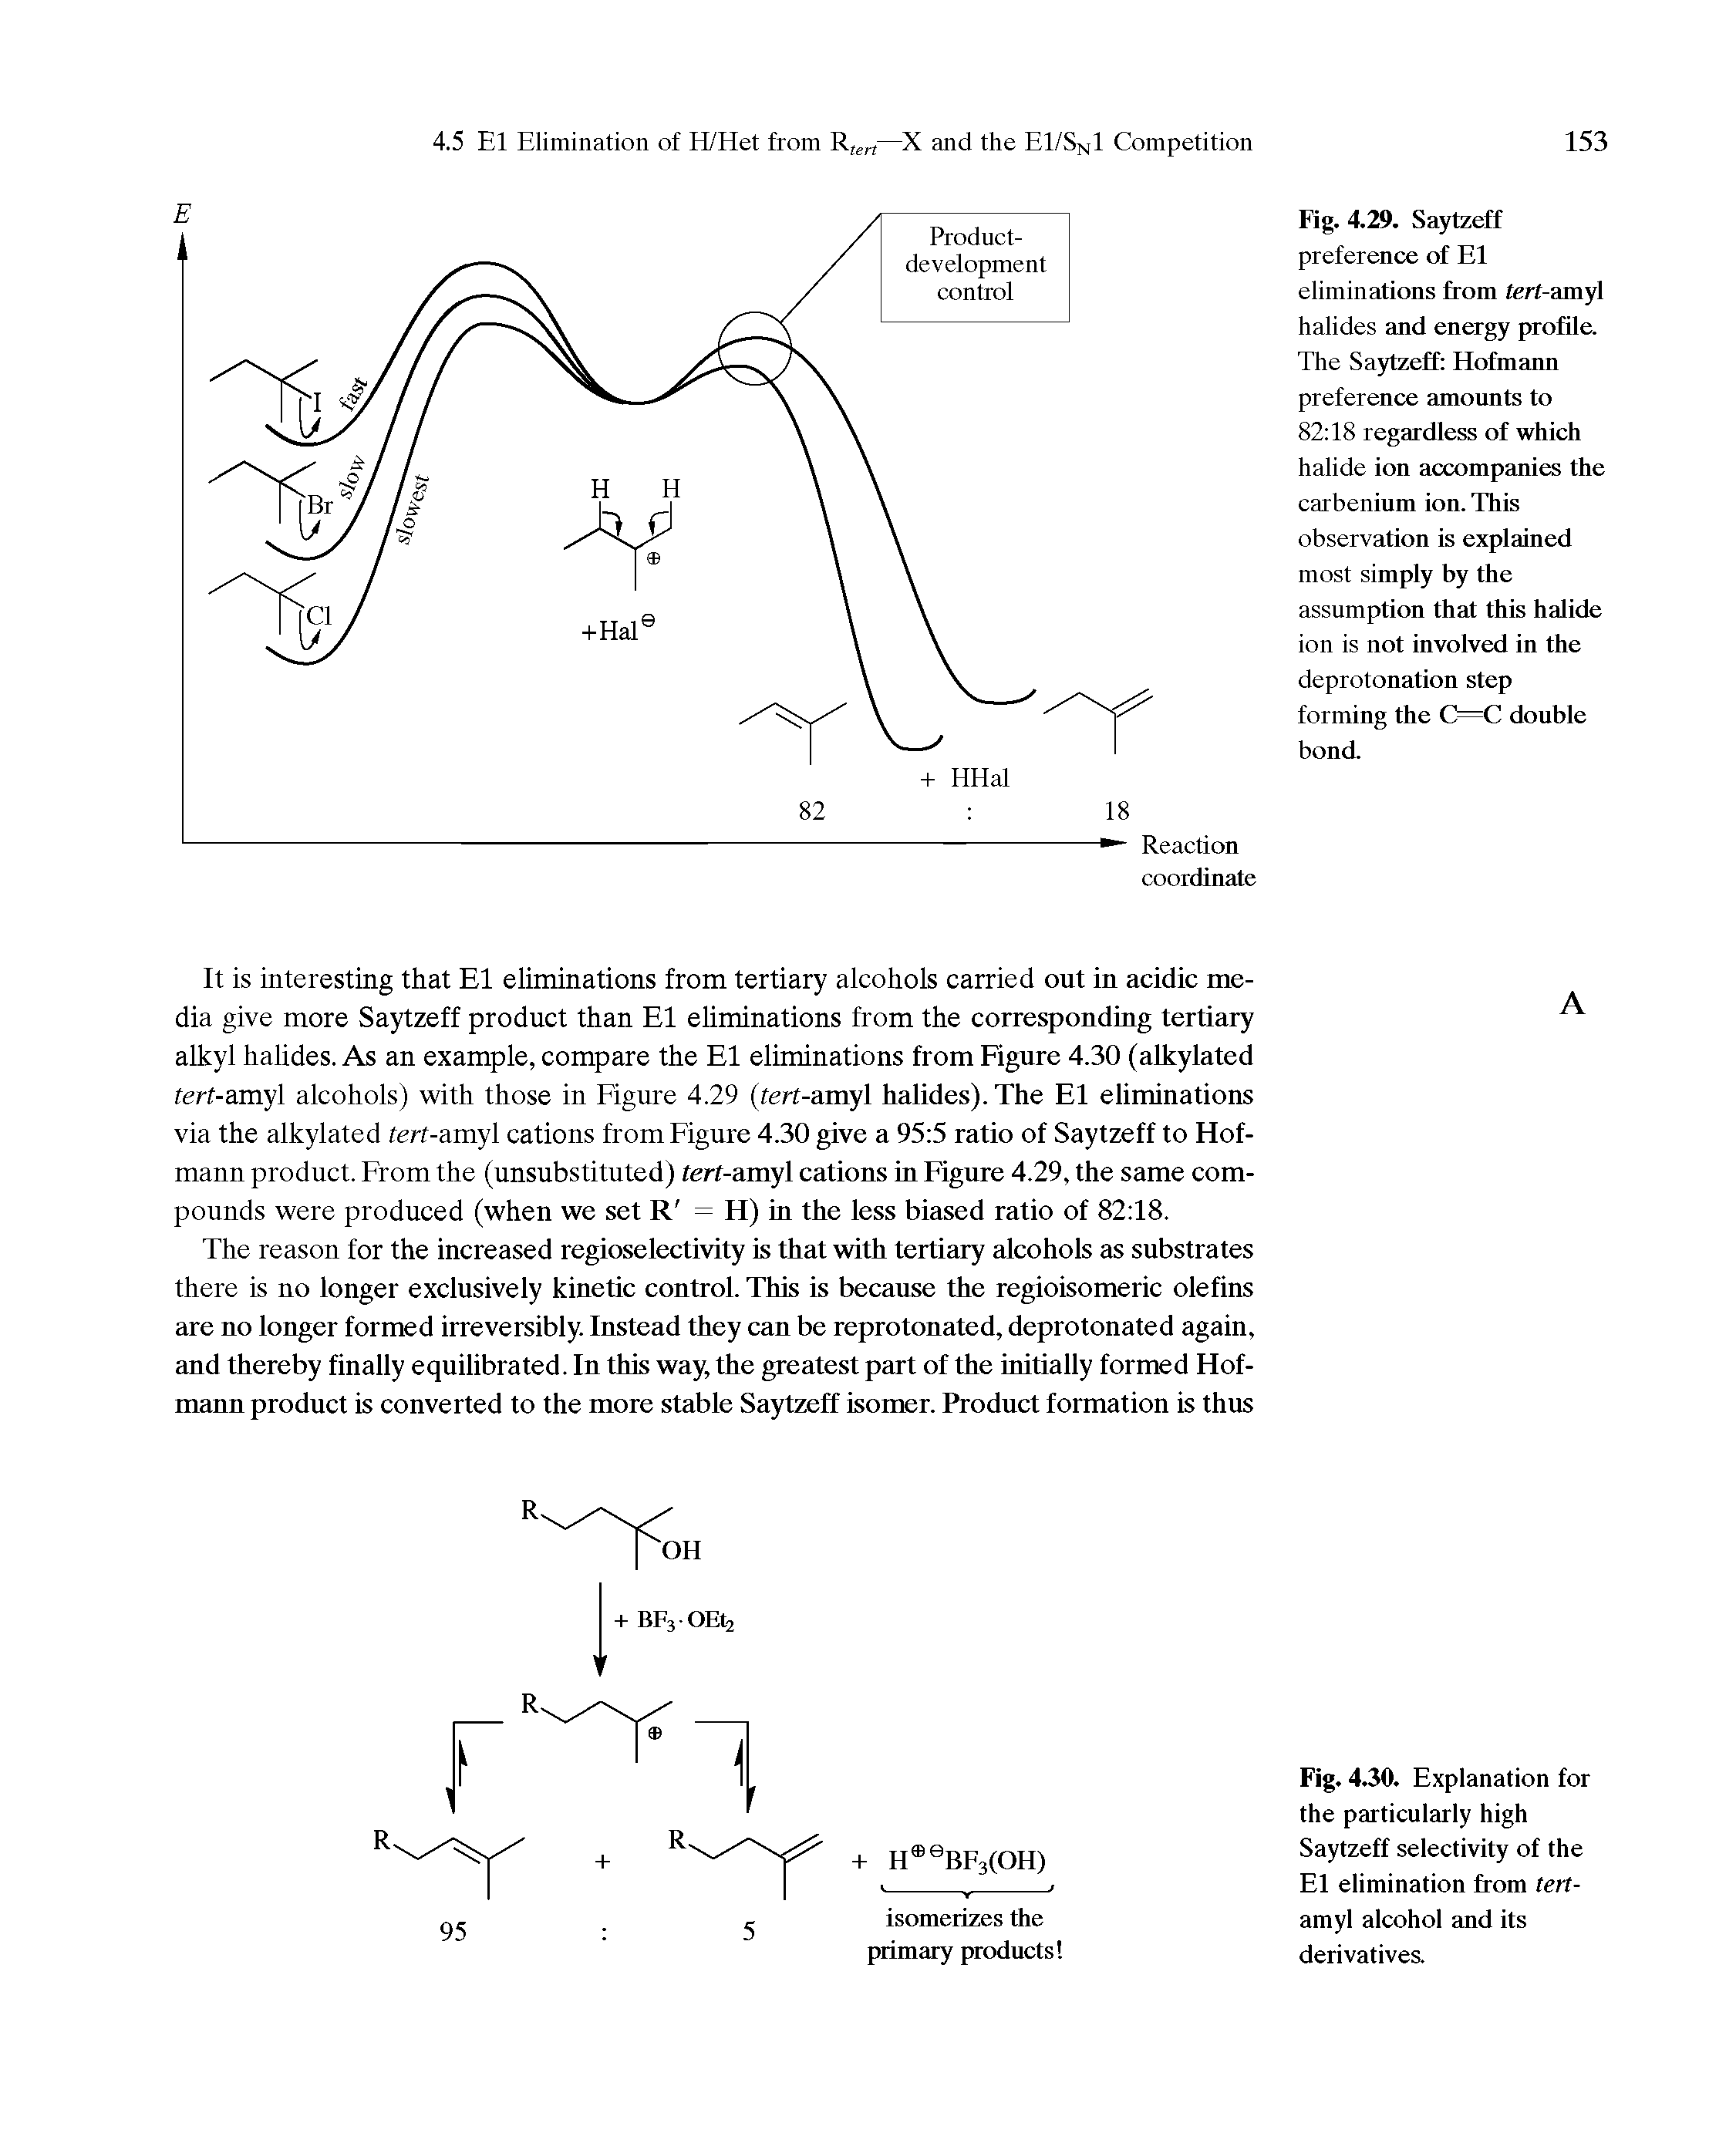 Fig. 4.30. Explanation for the particularly high Saytzeff selectivity of the El elimination from ferf-amyl alcohol and its derivatives.